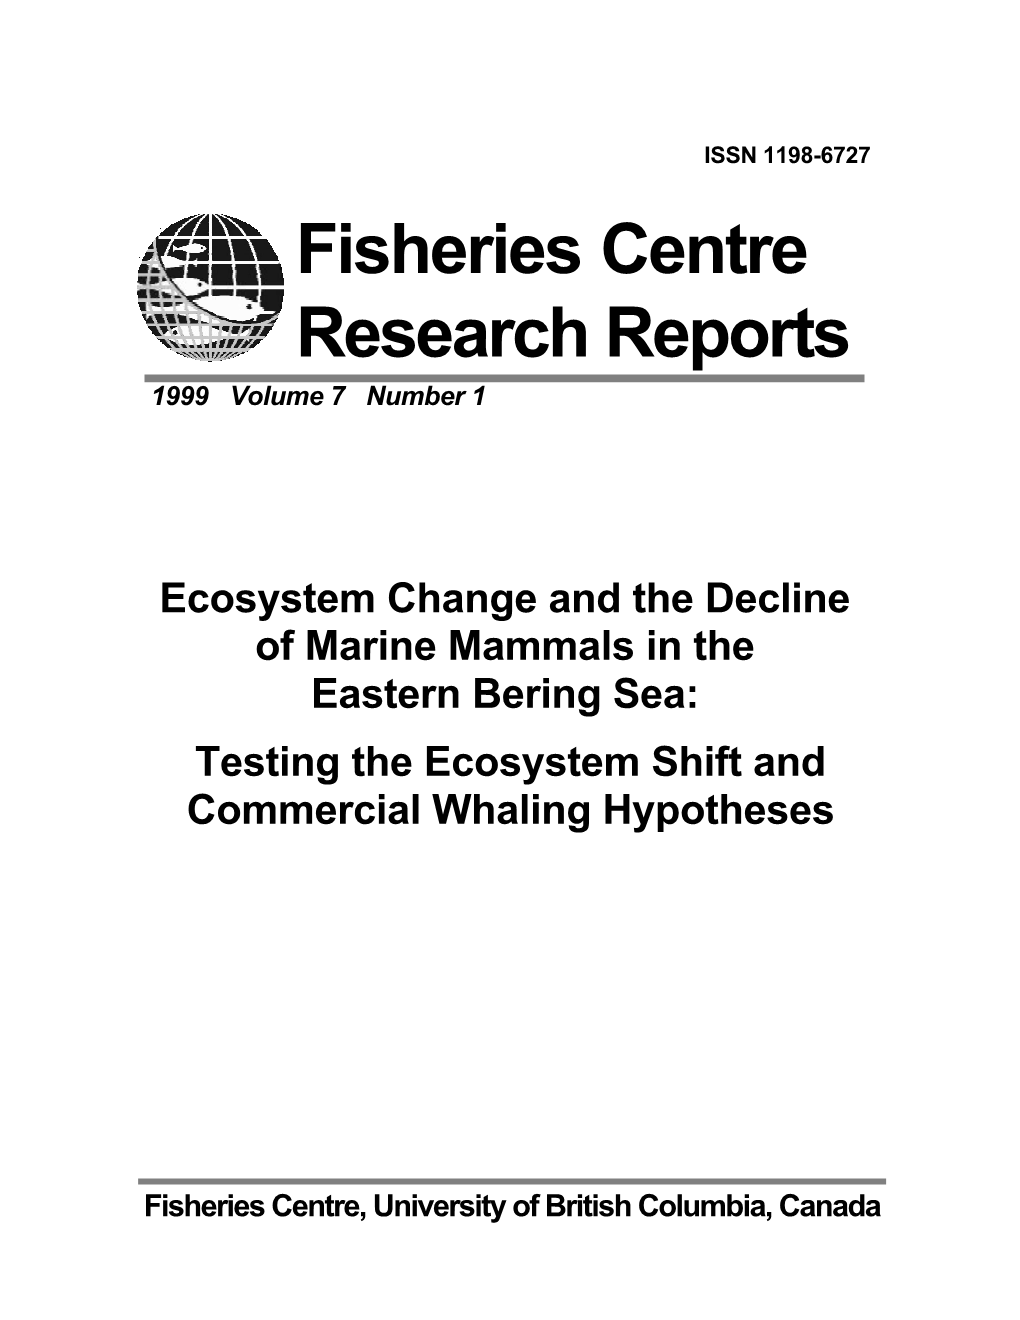 Fisheries Centre Research Reports 1999 Volume 7 Number 1